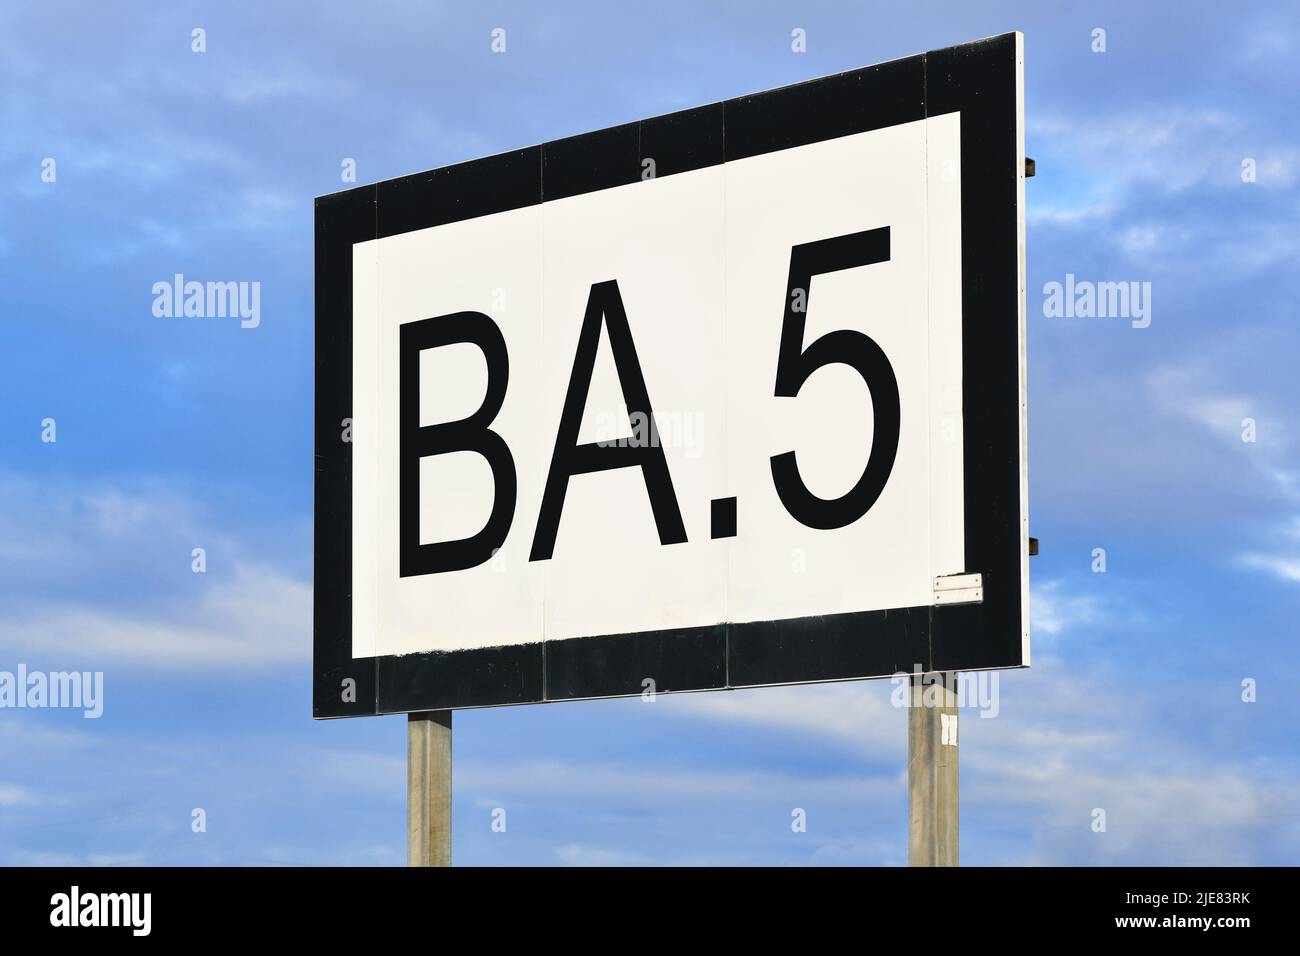 Omicron subvariant BA.5 virus mutation concept with text on billboard Stock Photo